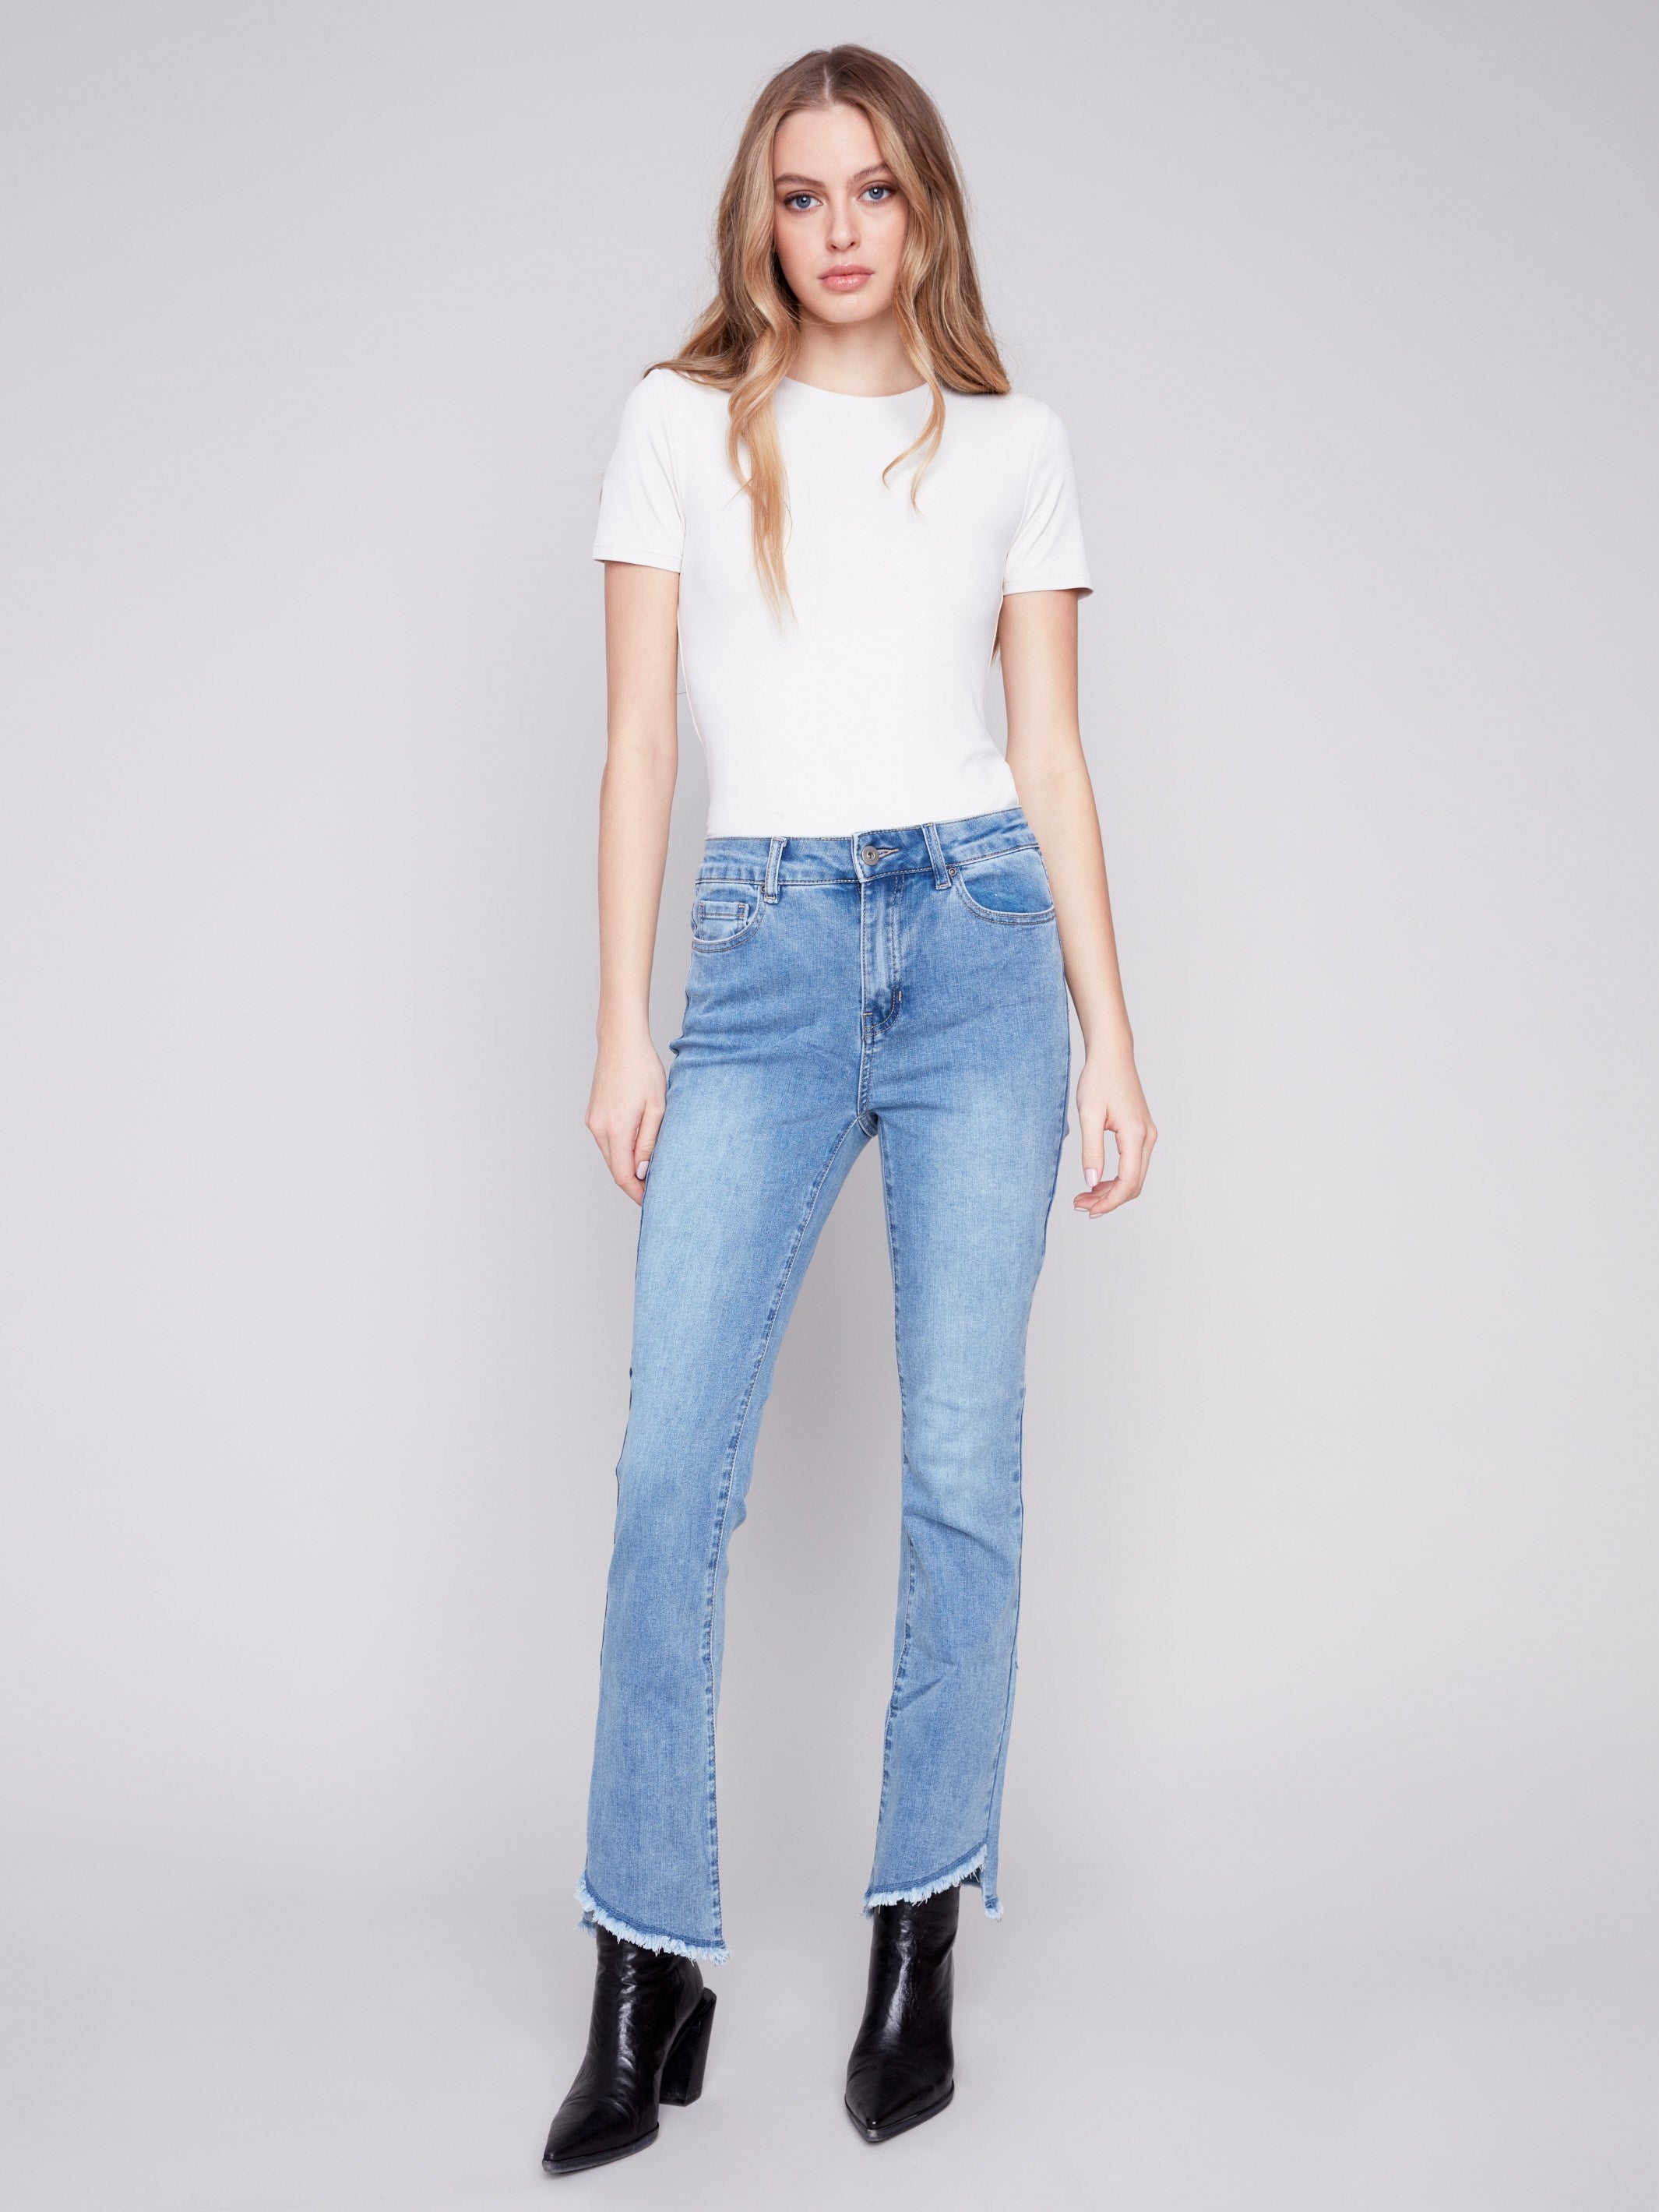 Bootcut Jeans with Asymmetrical Hem - Light Blue - Charlie B Collection Canada - Image 4